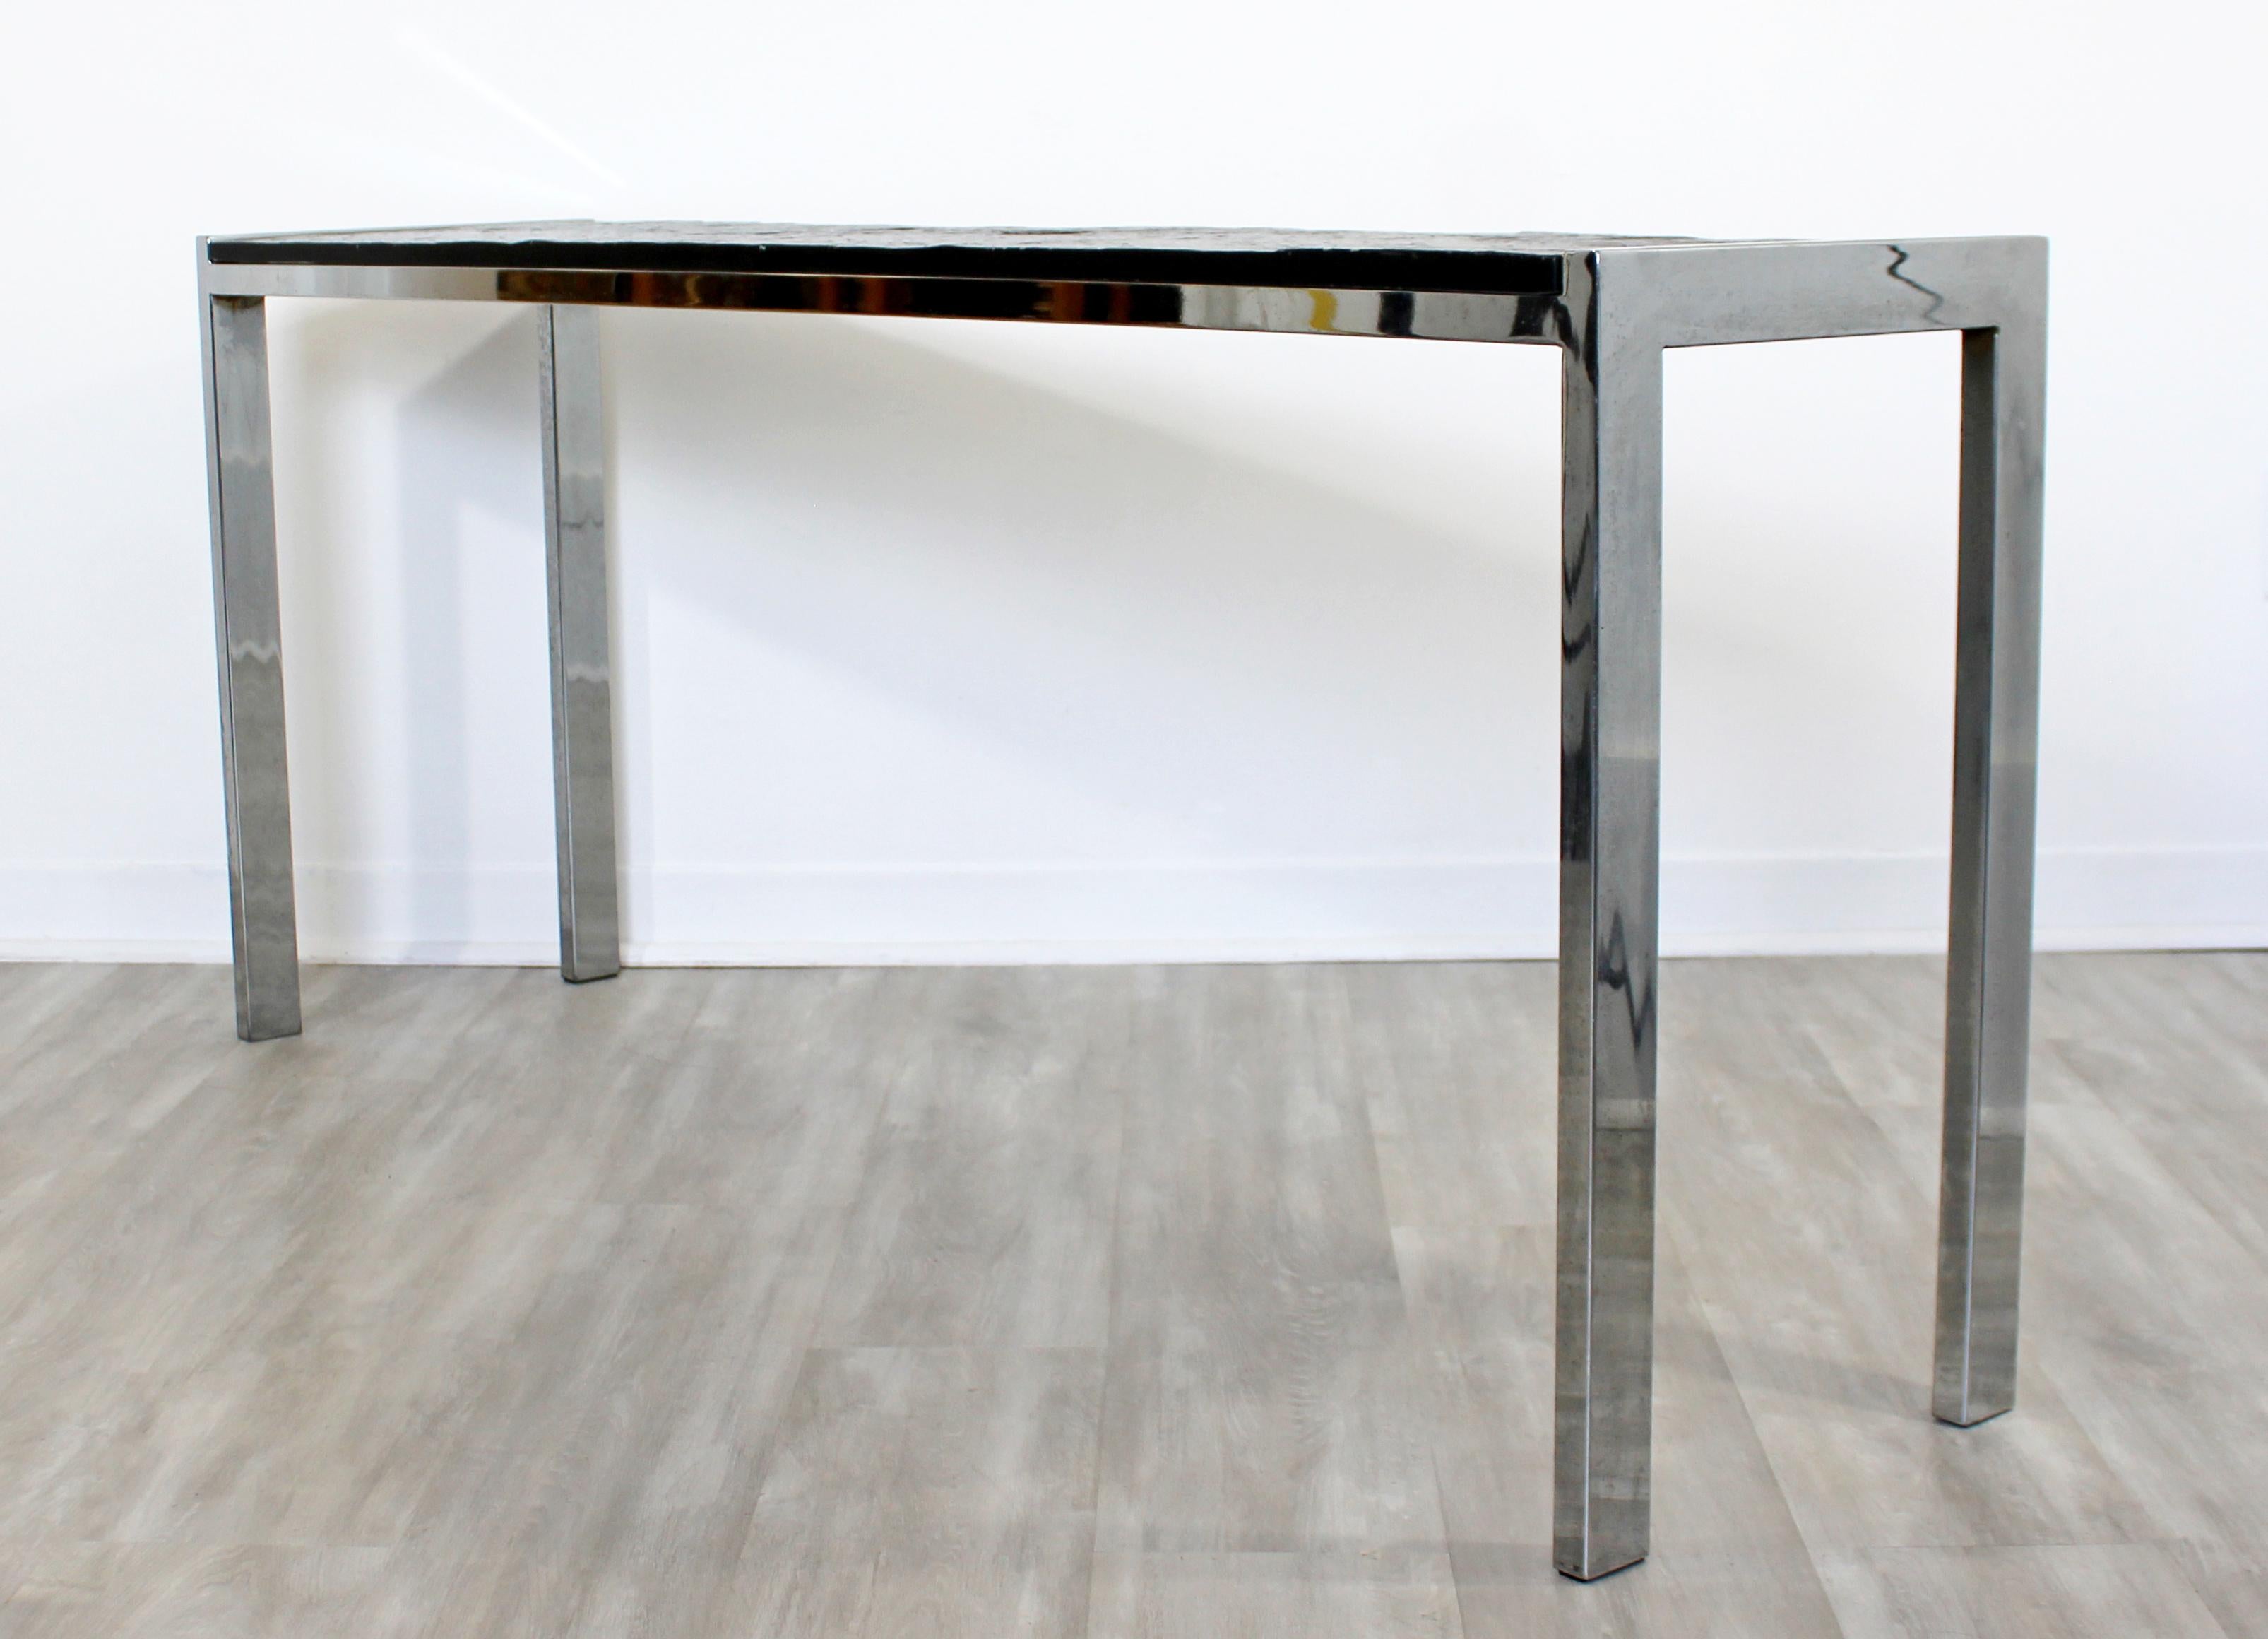 For your consideration is a simple and chic console table, with a slate top on a flat bar chrome base, in the style of Paul Evans or Milo Baughman, circa 1970s. In excellent condition. The dimensions are 60